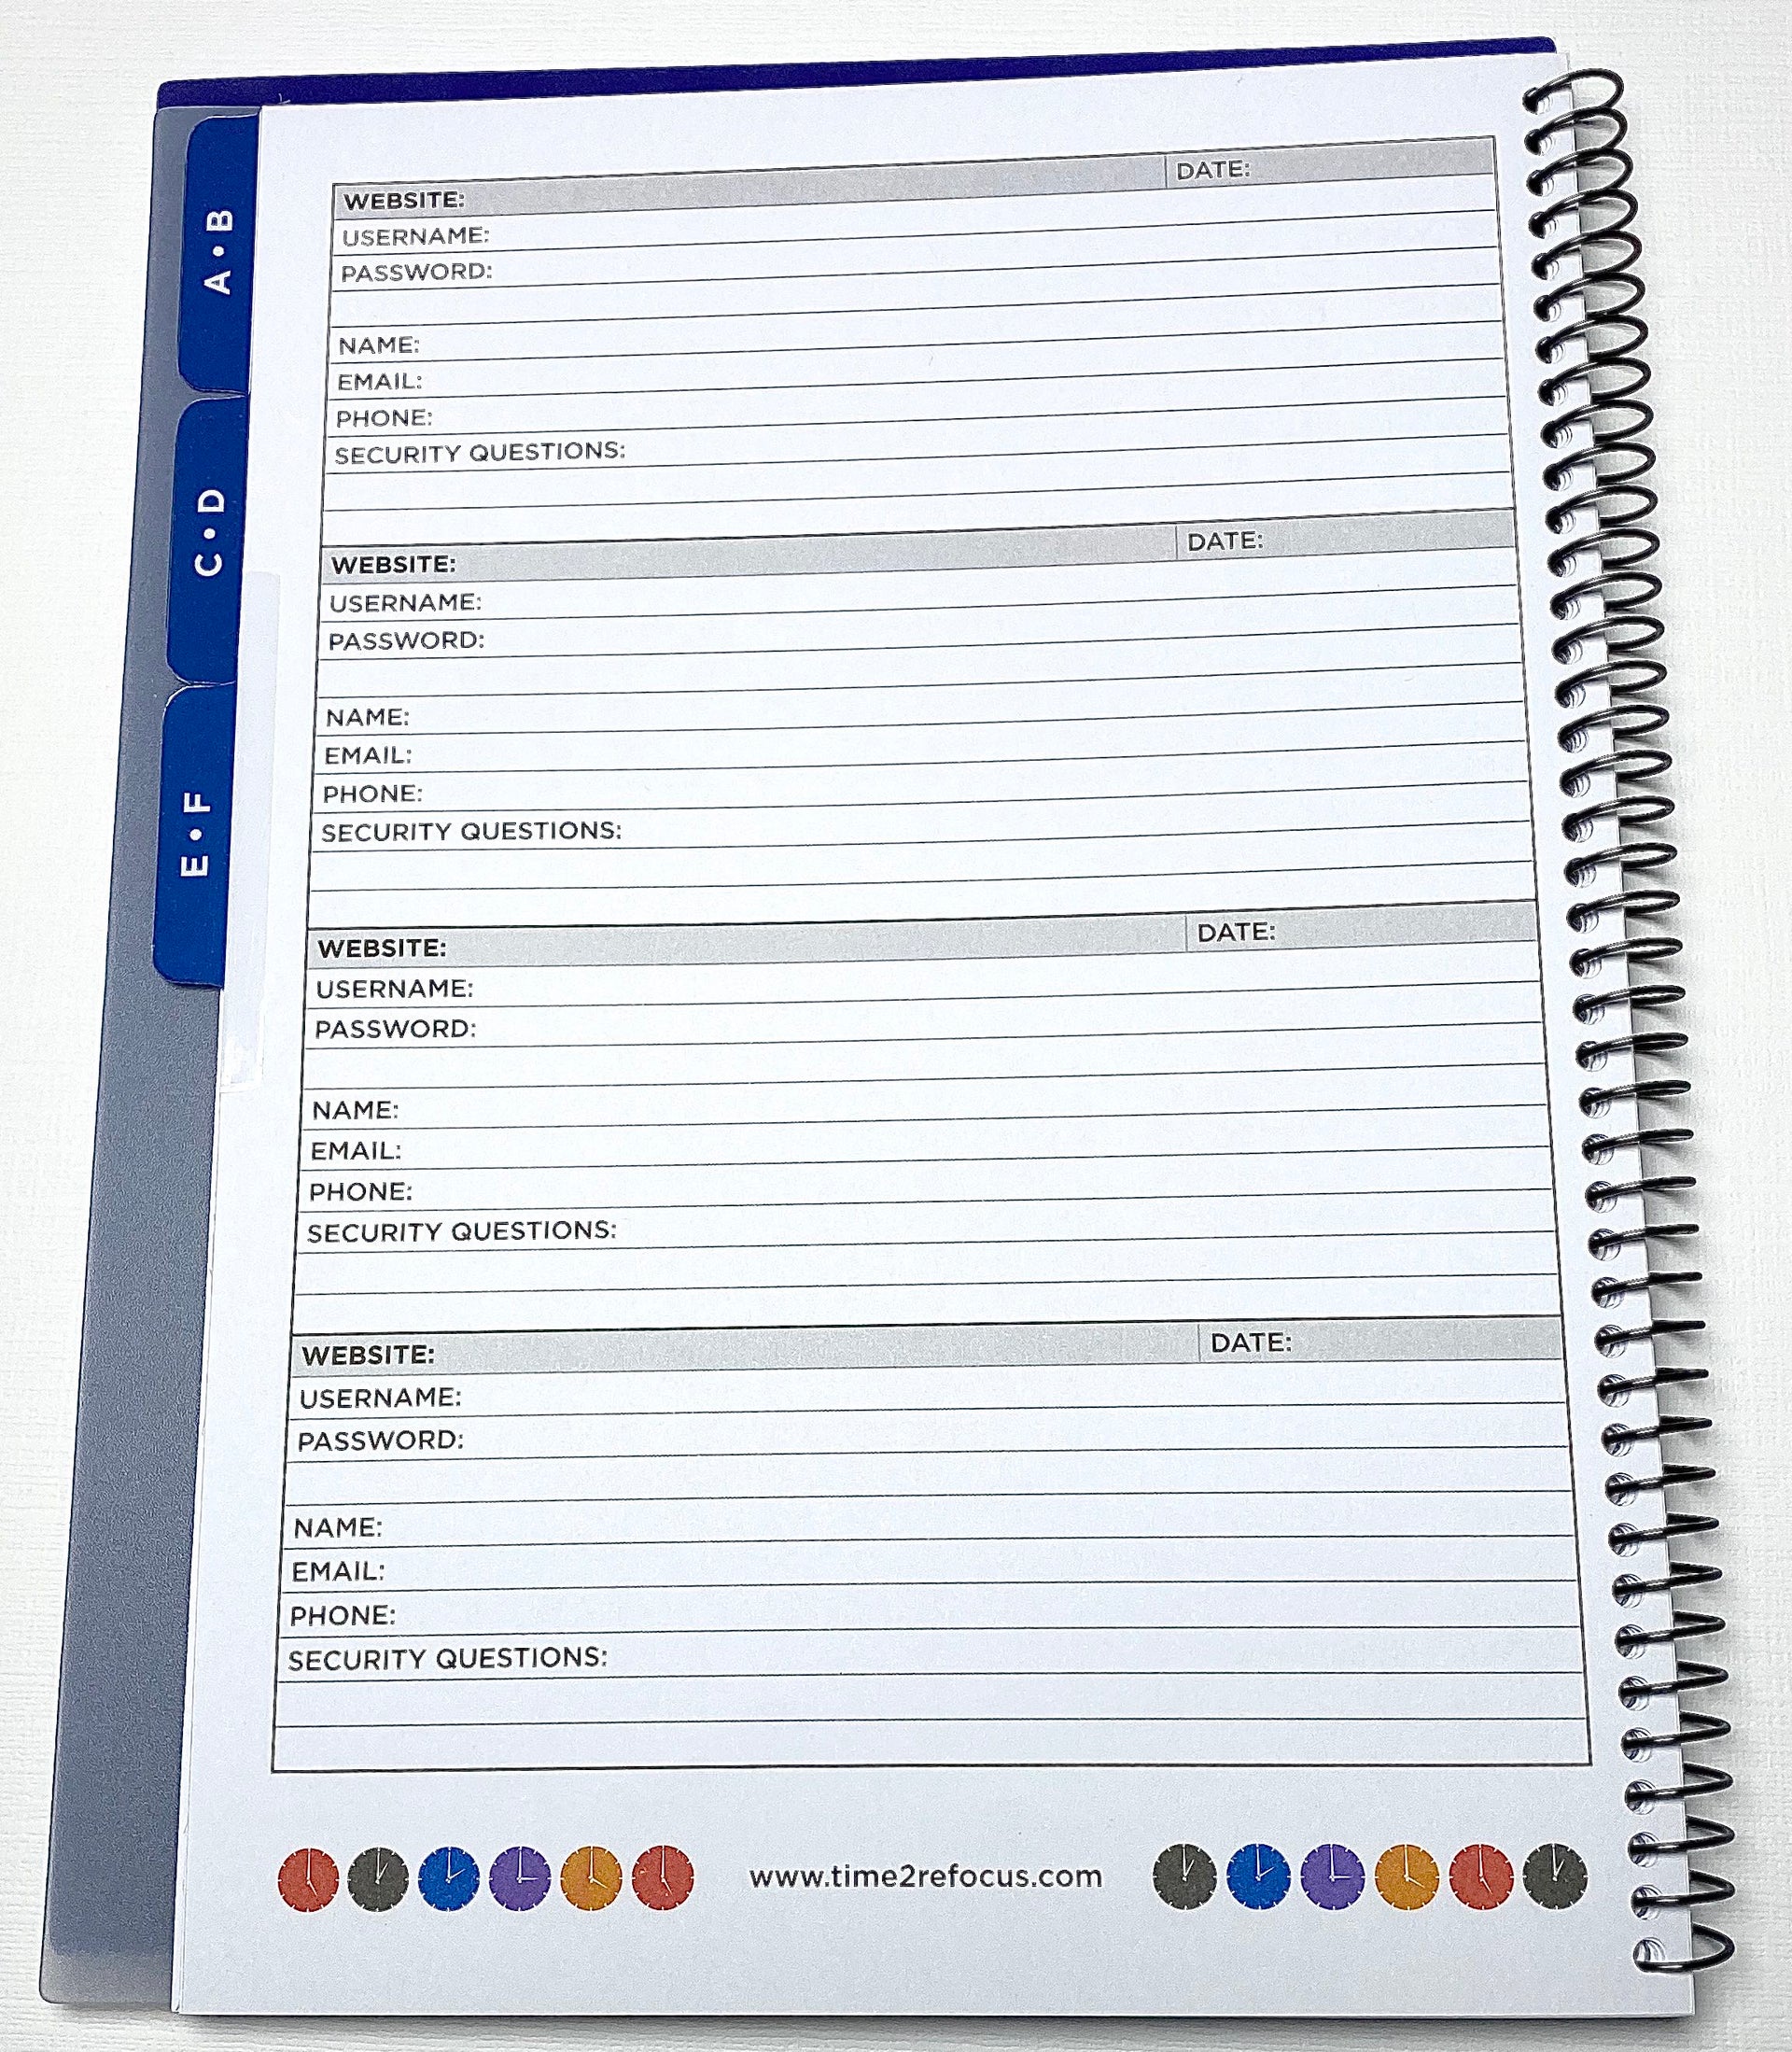 RE-FOCUS THE CREATIVE OFFICE, Left-Handed Large Password Keeper Book, Blue